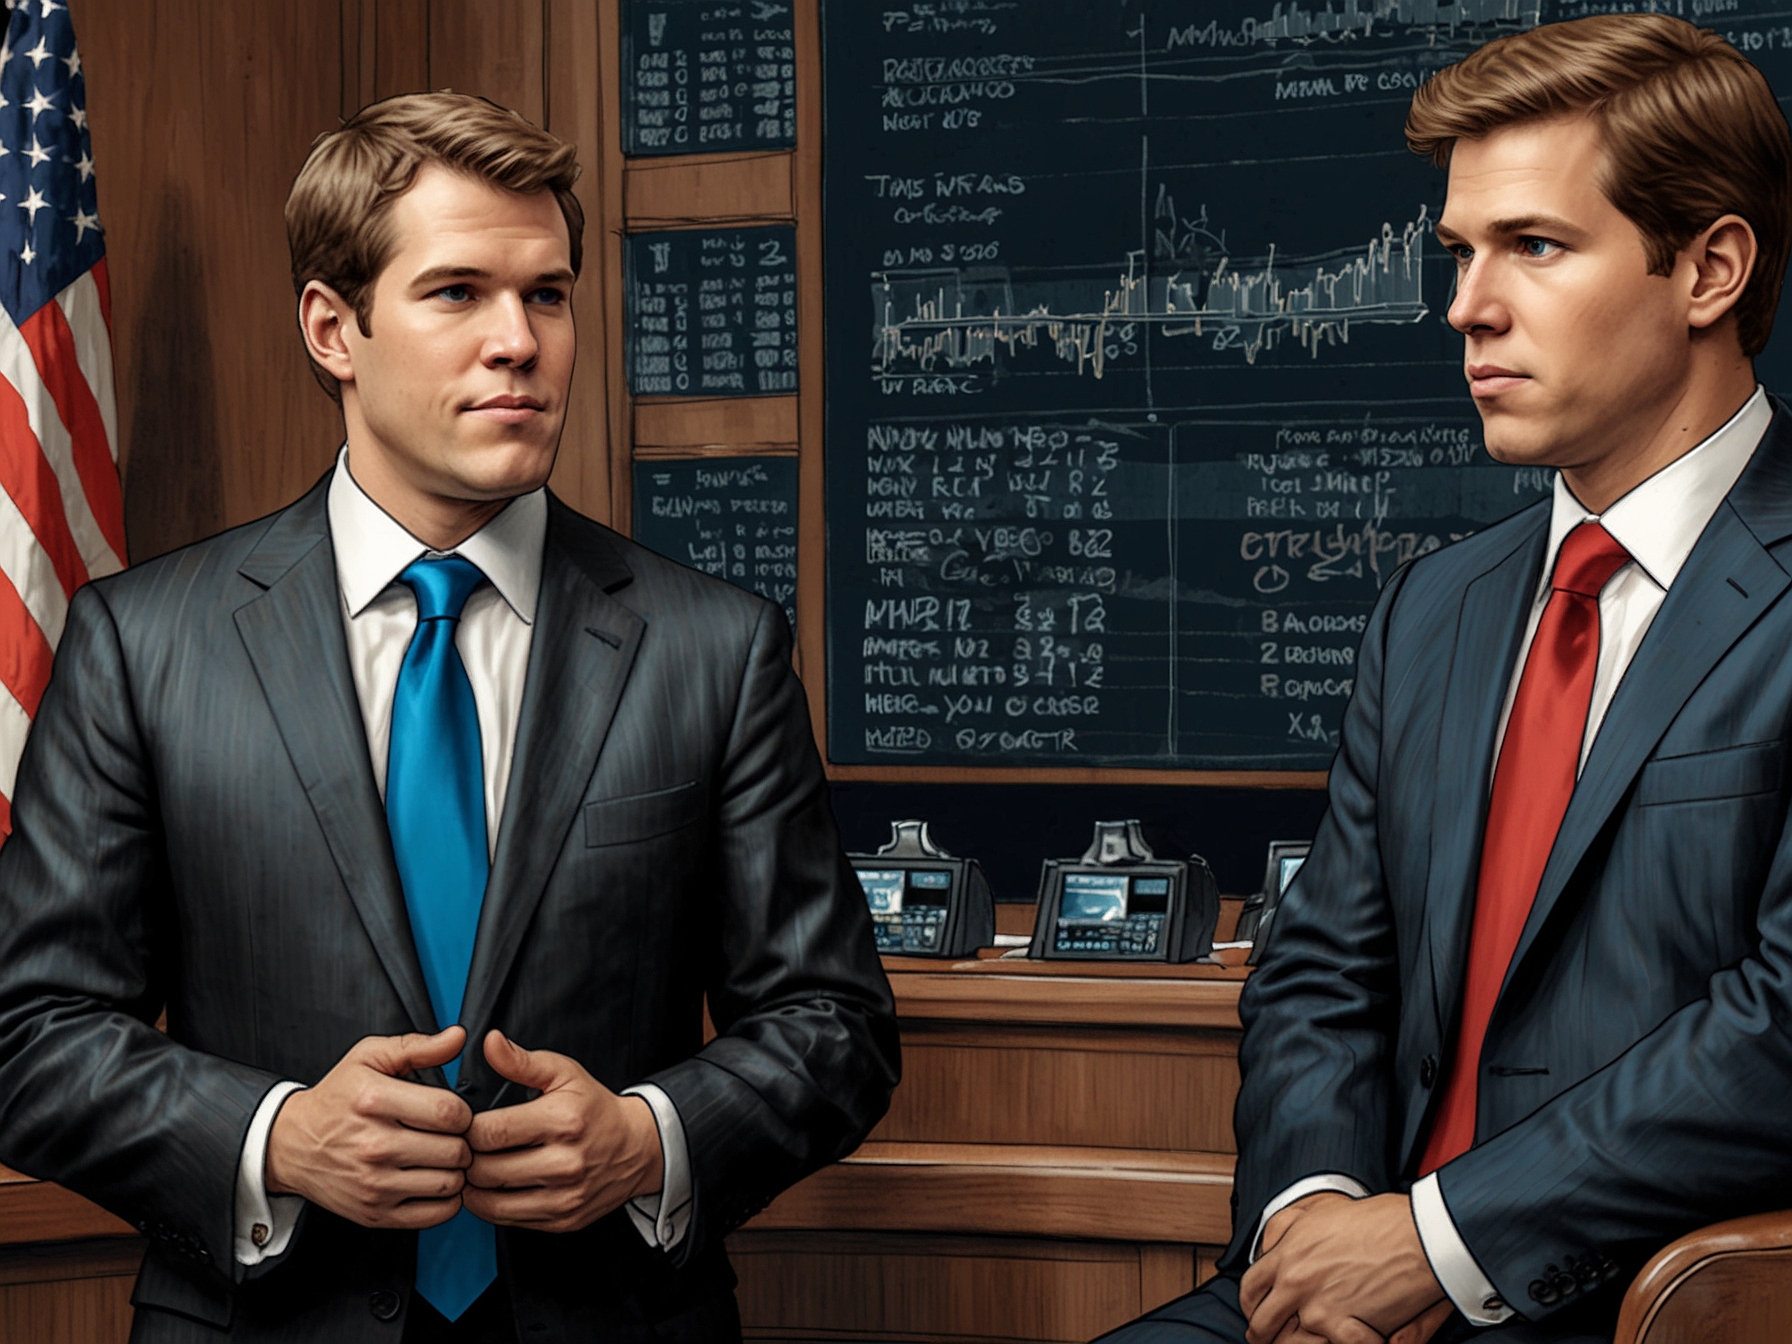 A graphic showing the Winklevoss twins advocating for Donald Trump due to his favorable stance on cryptocurrency regulation and blockchain technology.